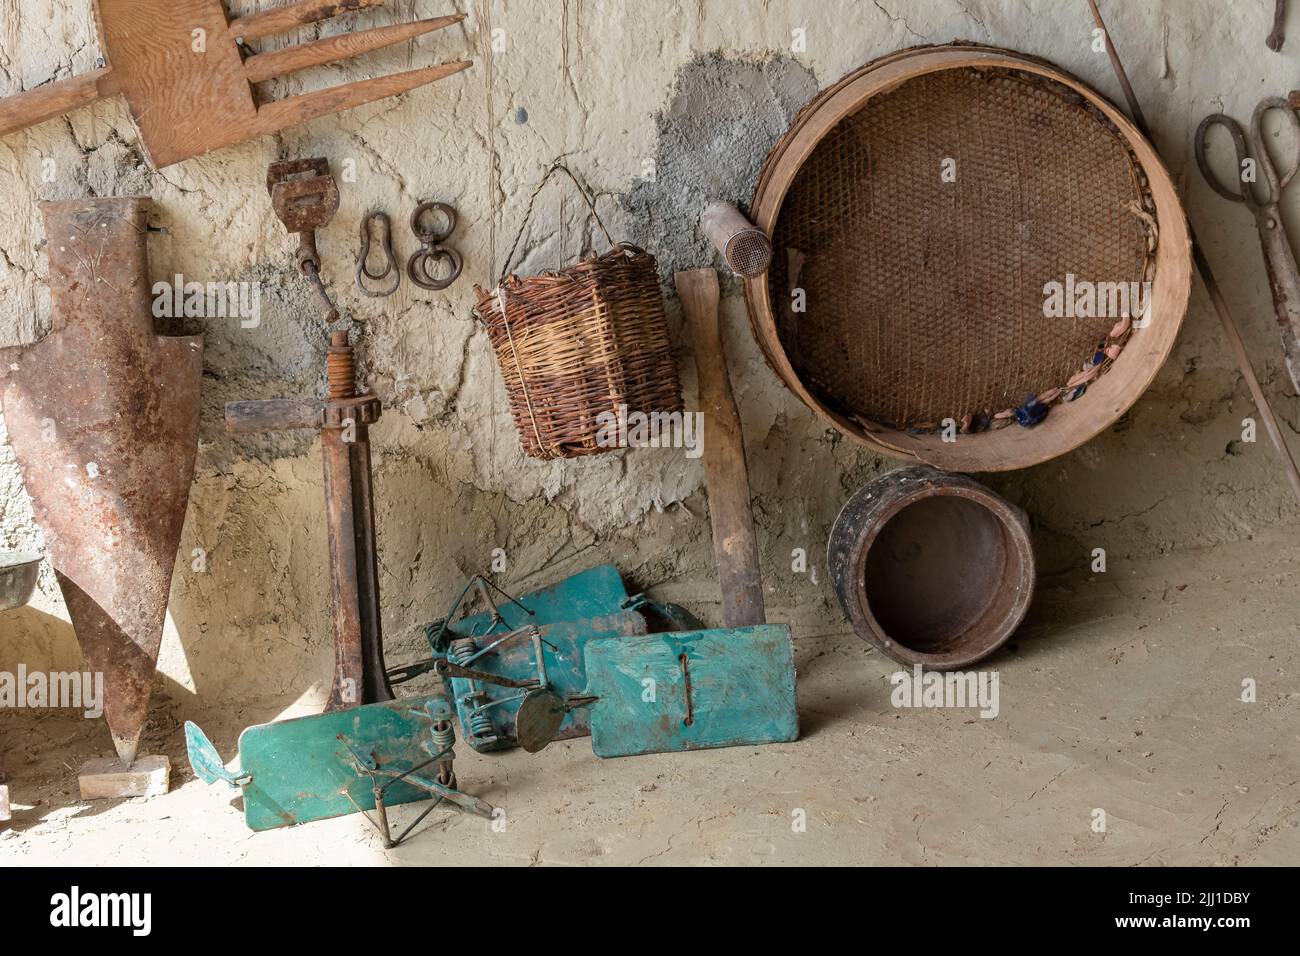 Selective focus shot of mini museum with old-style traps and wooden baskets, sieves and tools used in the village. Stock Photo